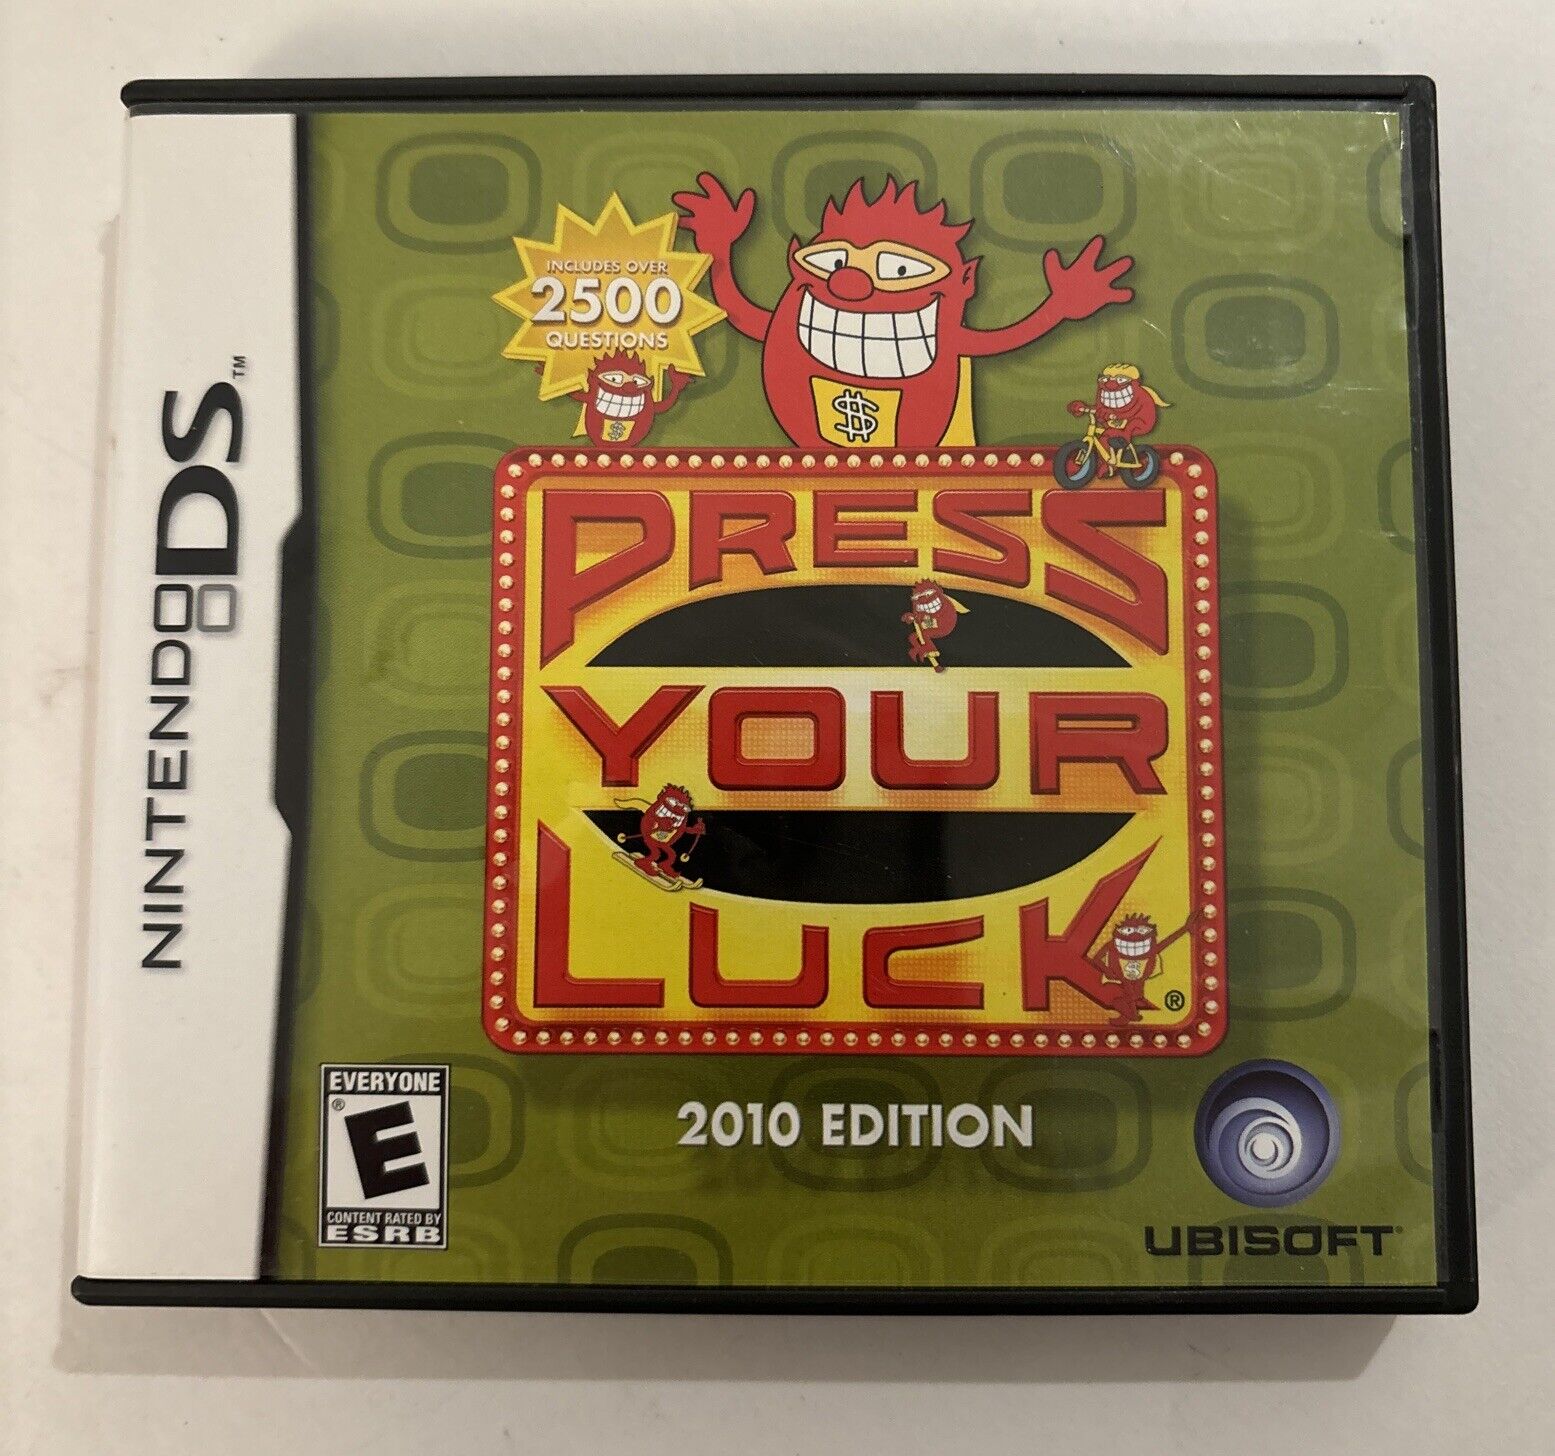 Press Your Luck: 2010 Edition (2009, Nintendo DS) Case & manual Only - NO GAME